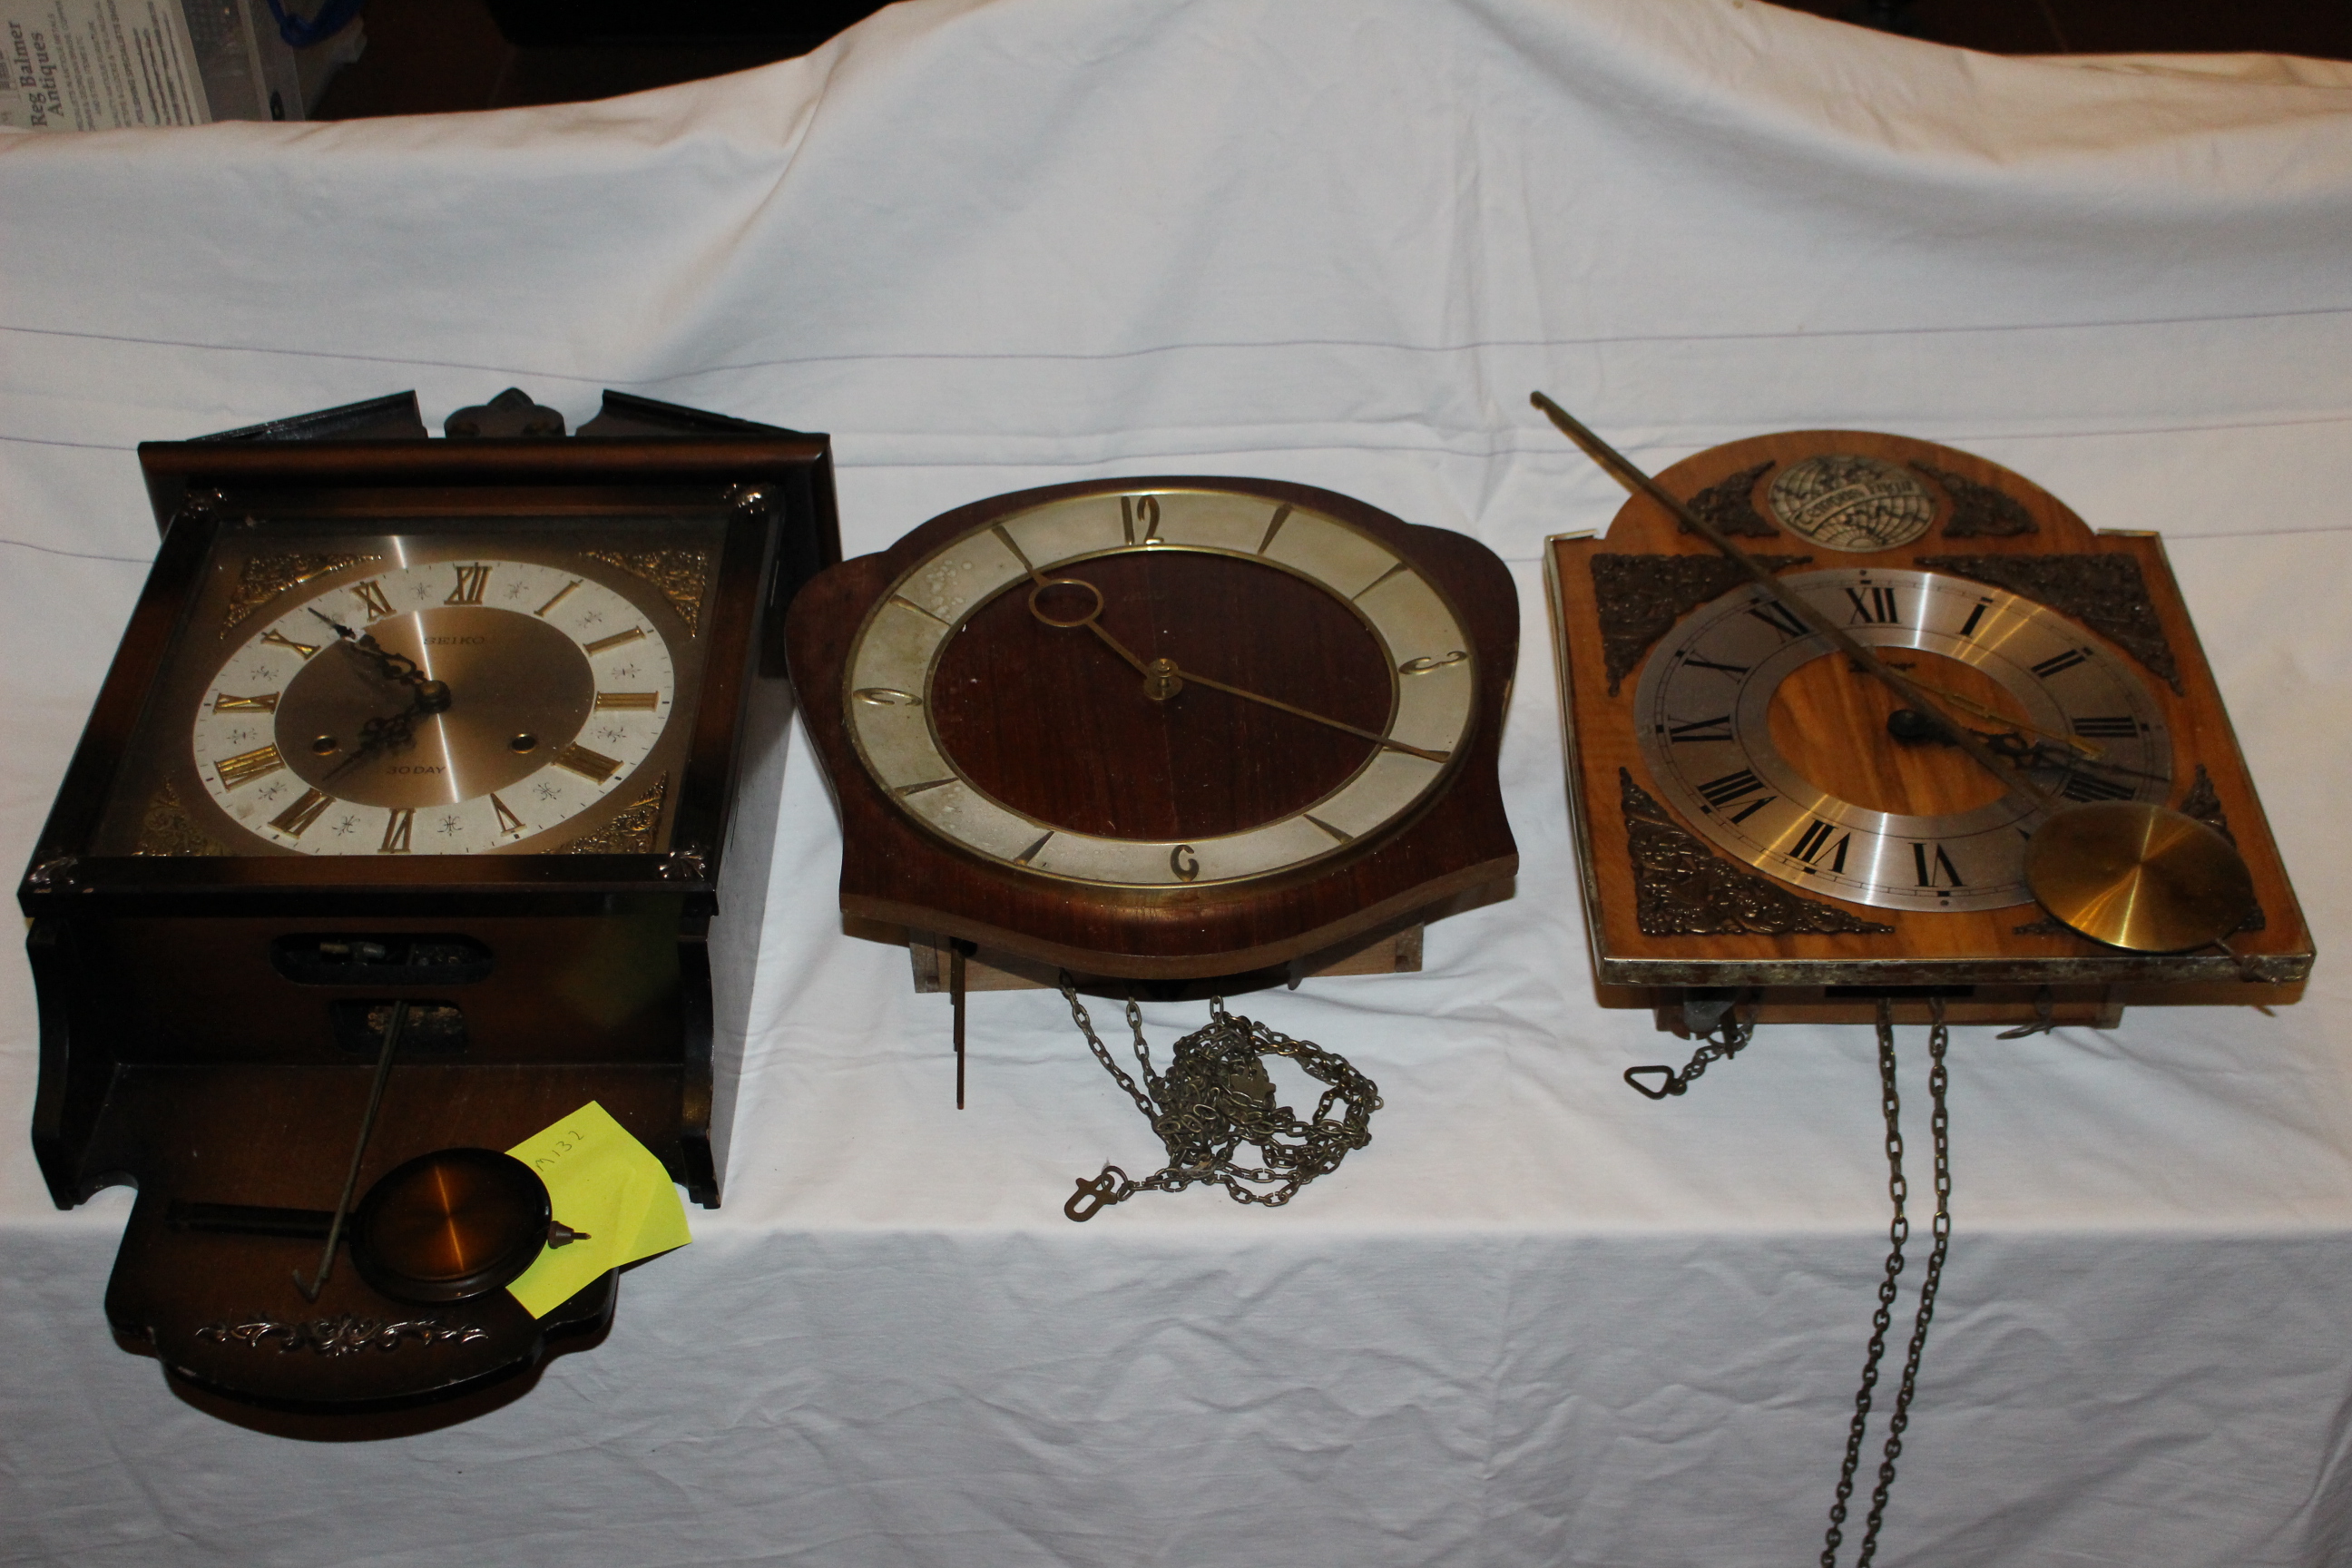 3 x vintage wall clocks 2 x weight driven and 1 x quartz/battery 2 x pendulum included but no